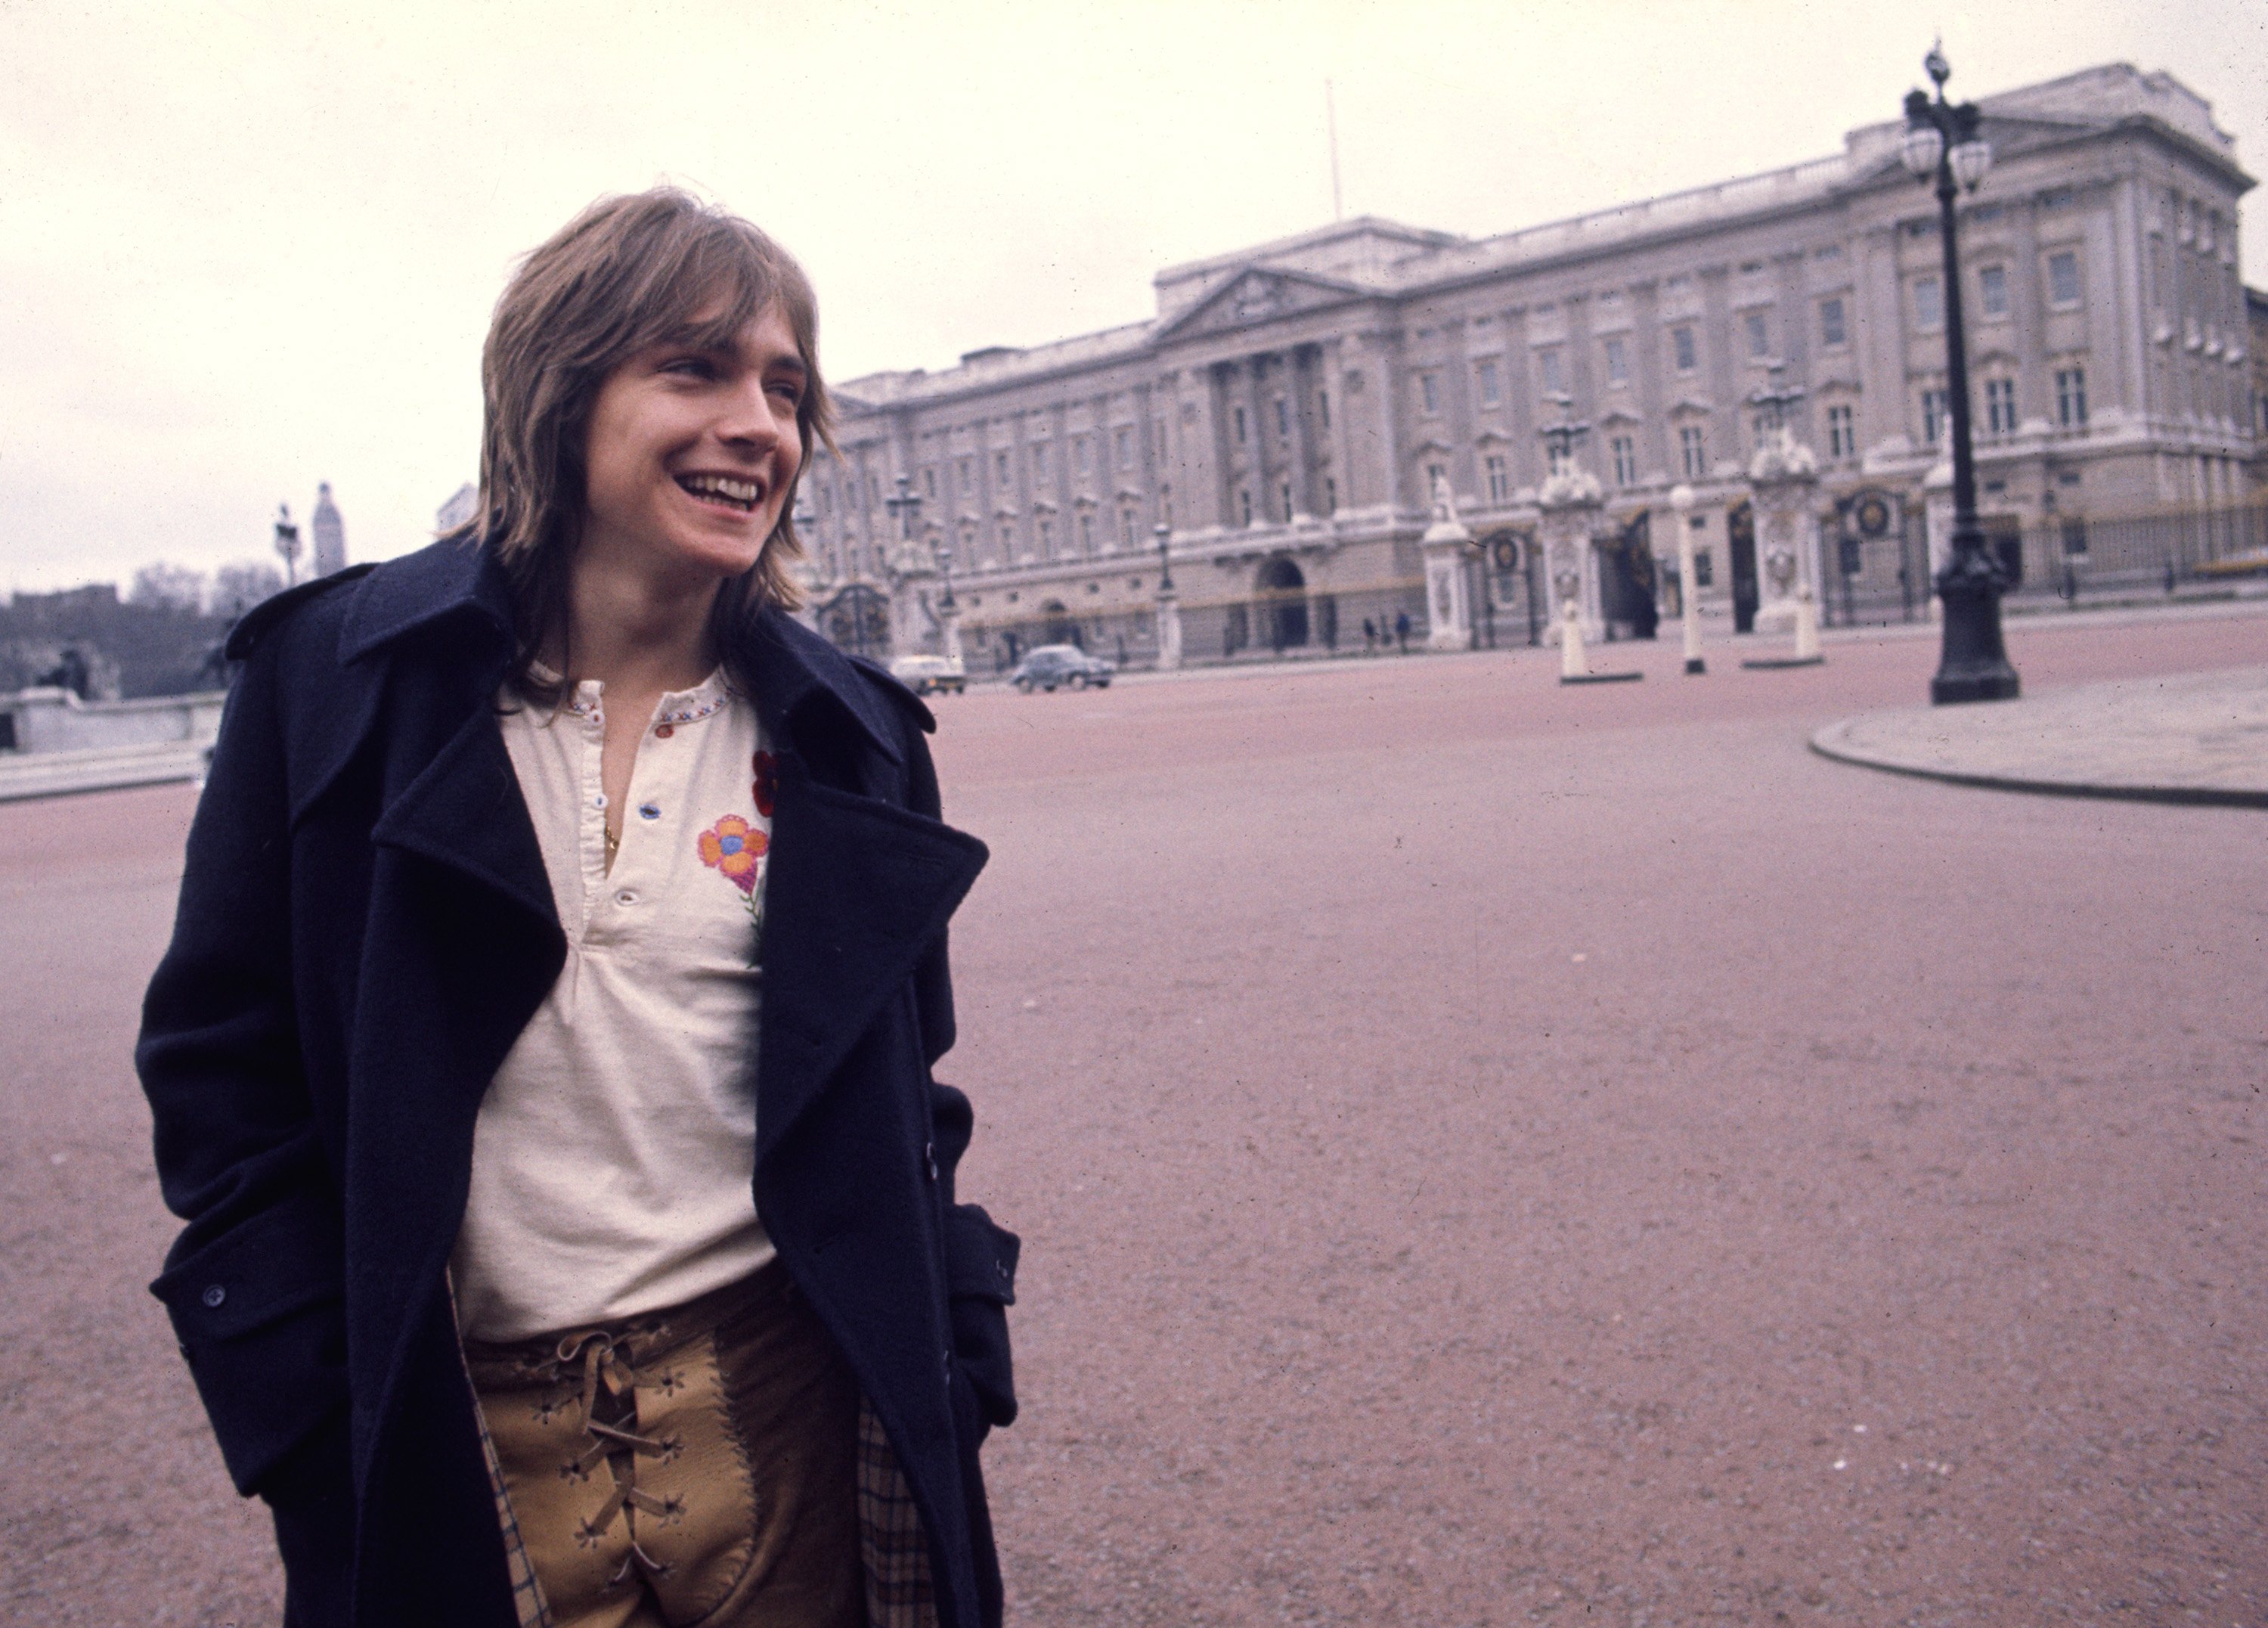 David Cassidy of The Partridge Family near a building